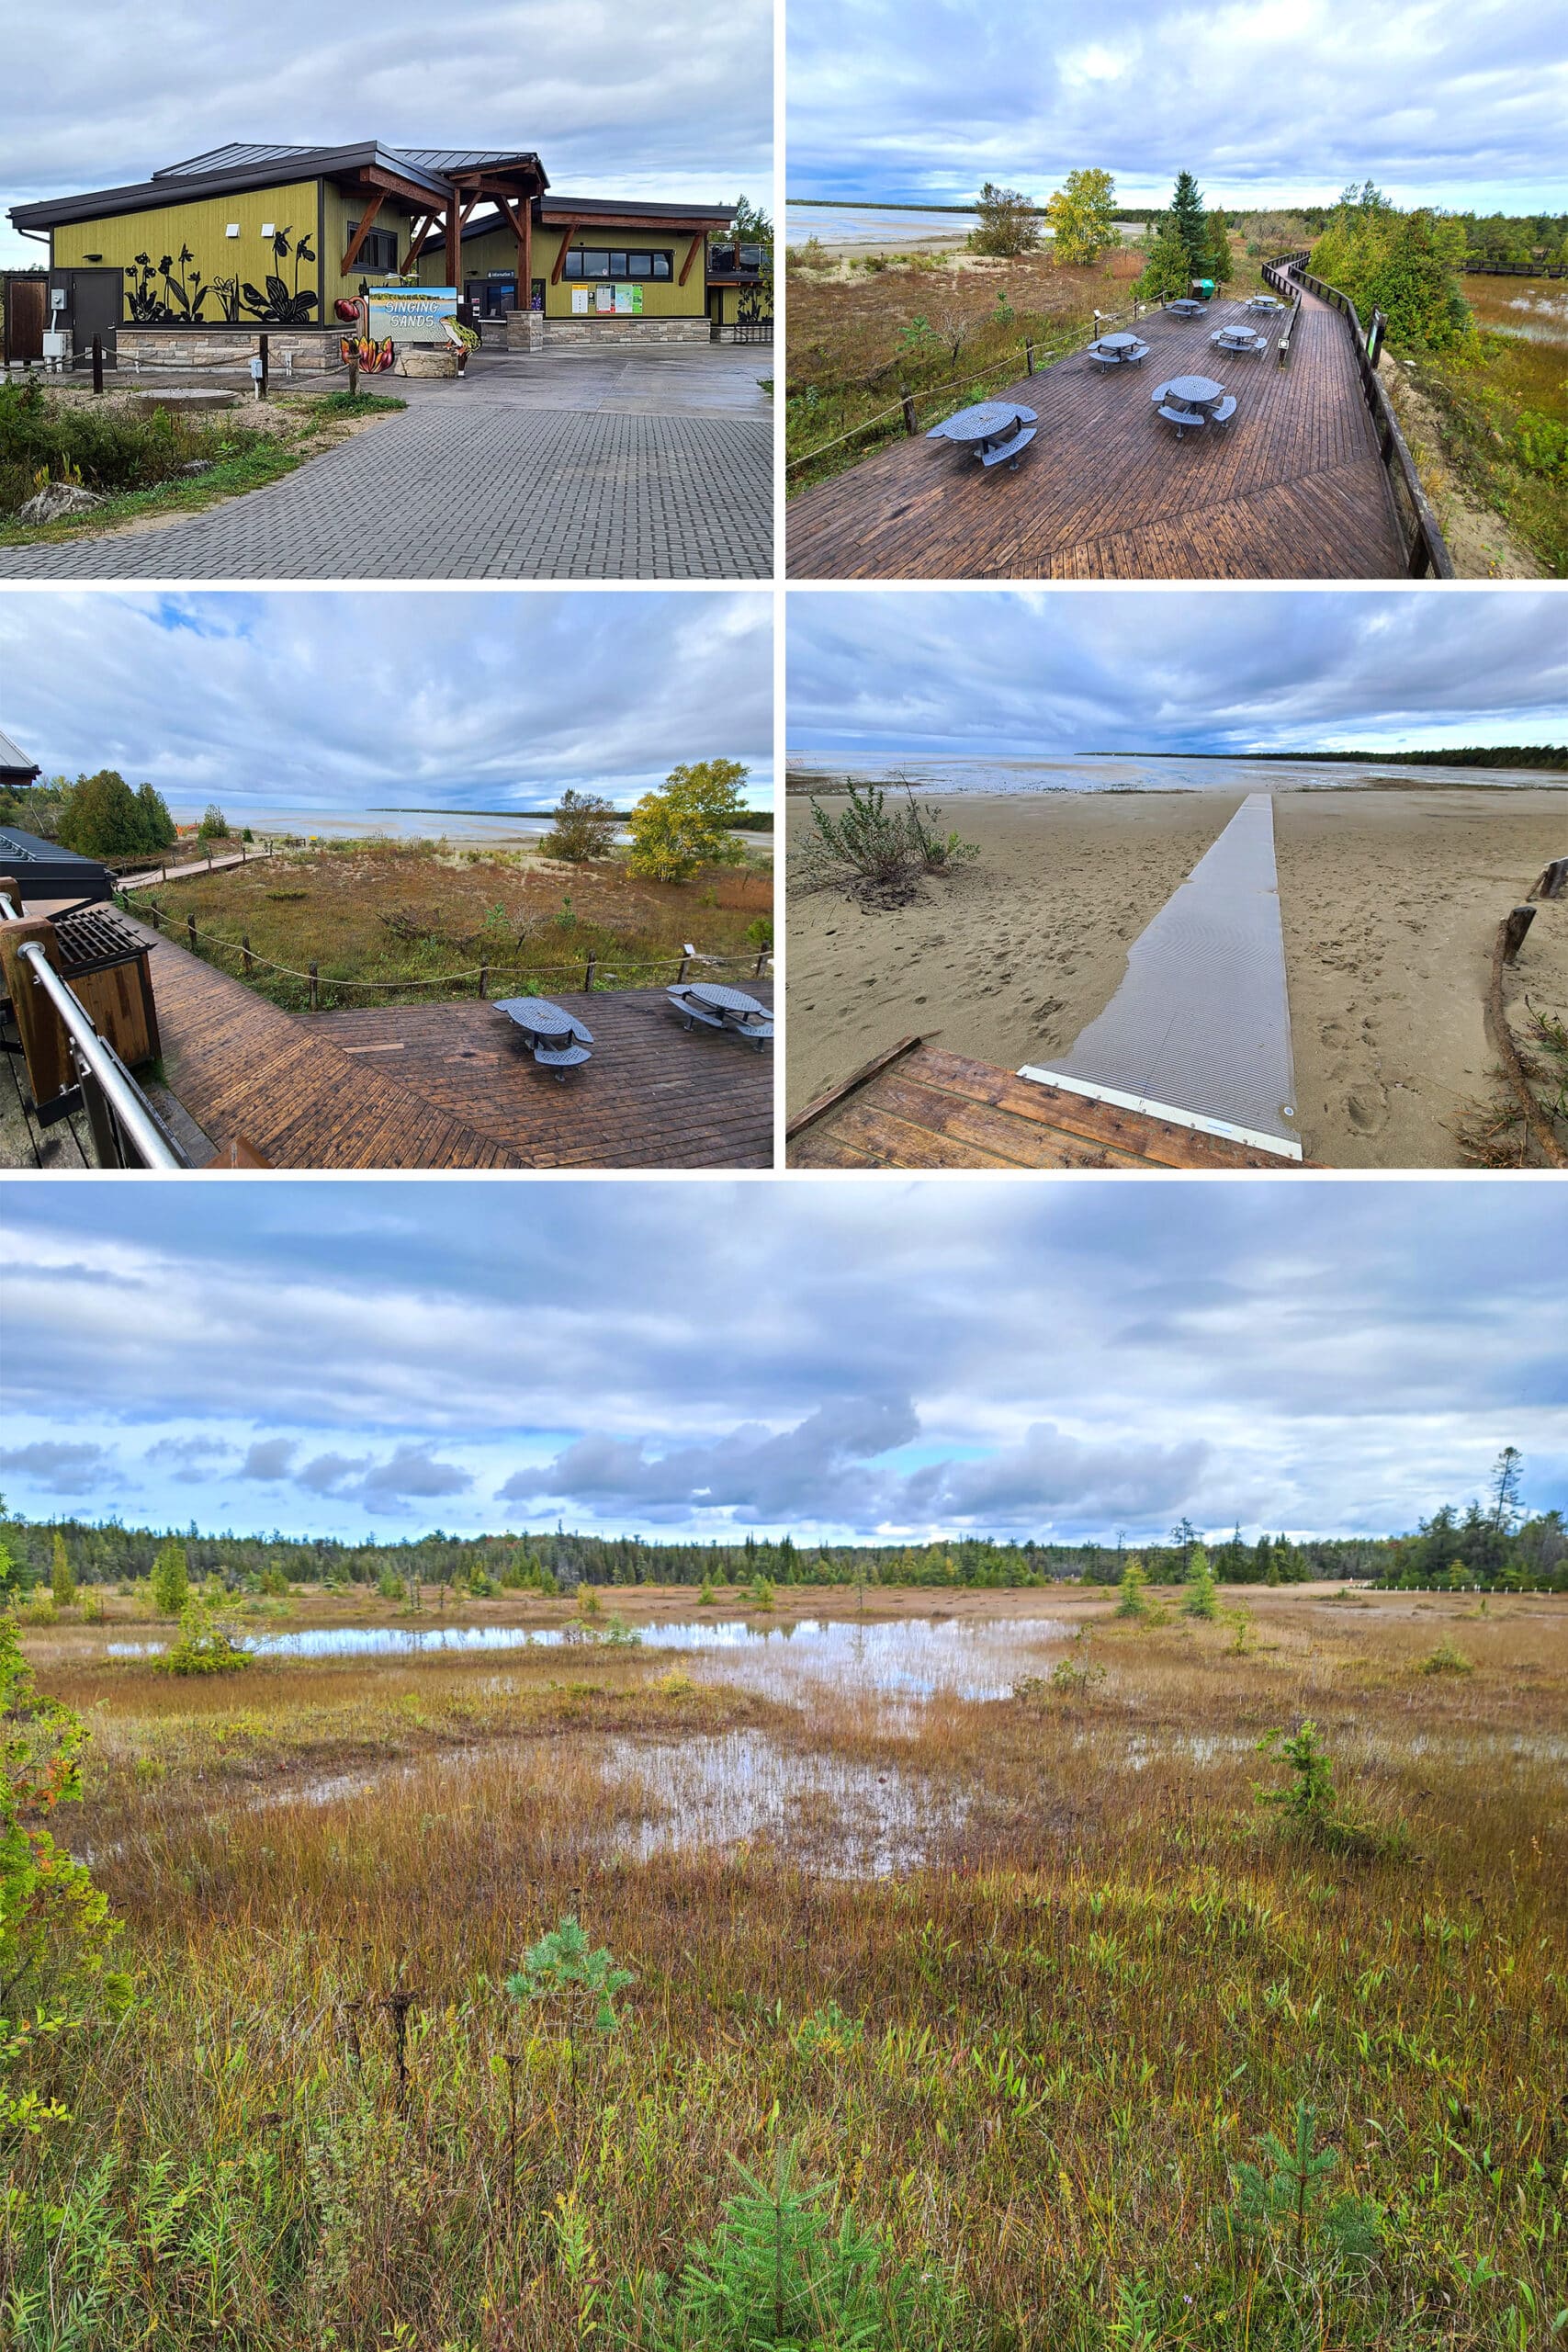 4 part image showing various views of Singing Sands Beach, with a marshy beach, boardwalks, picnic area, and more.